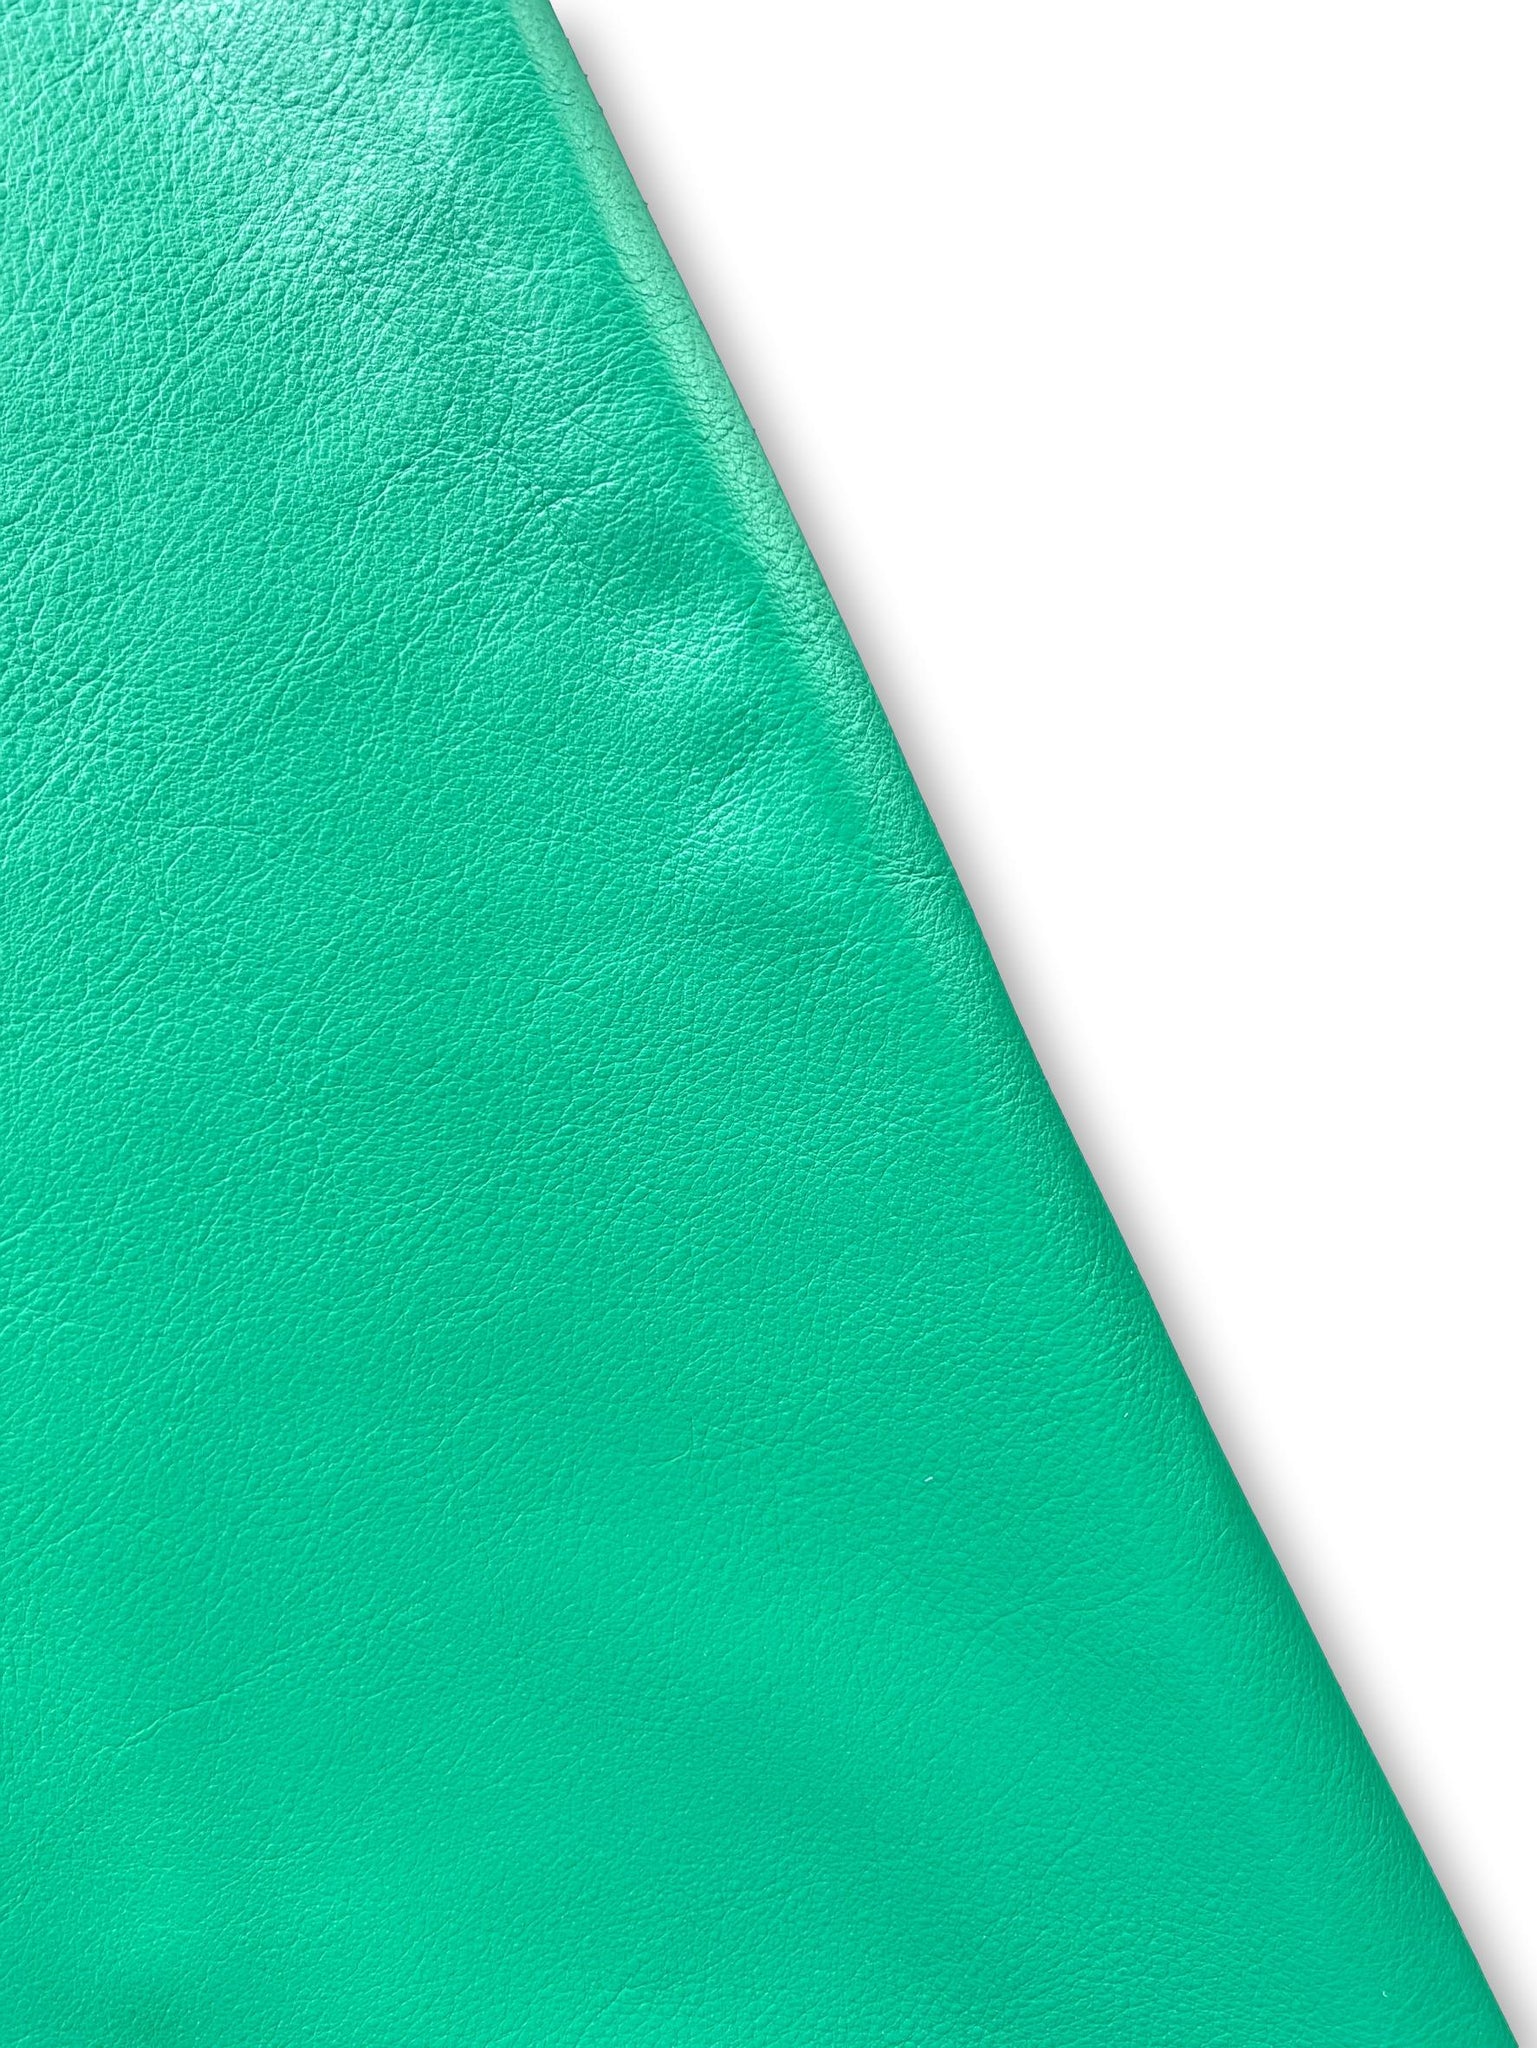 Kelly Green Natural Grain Cowhide Leather Skins